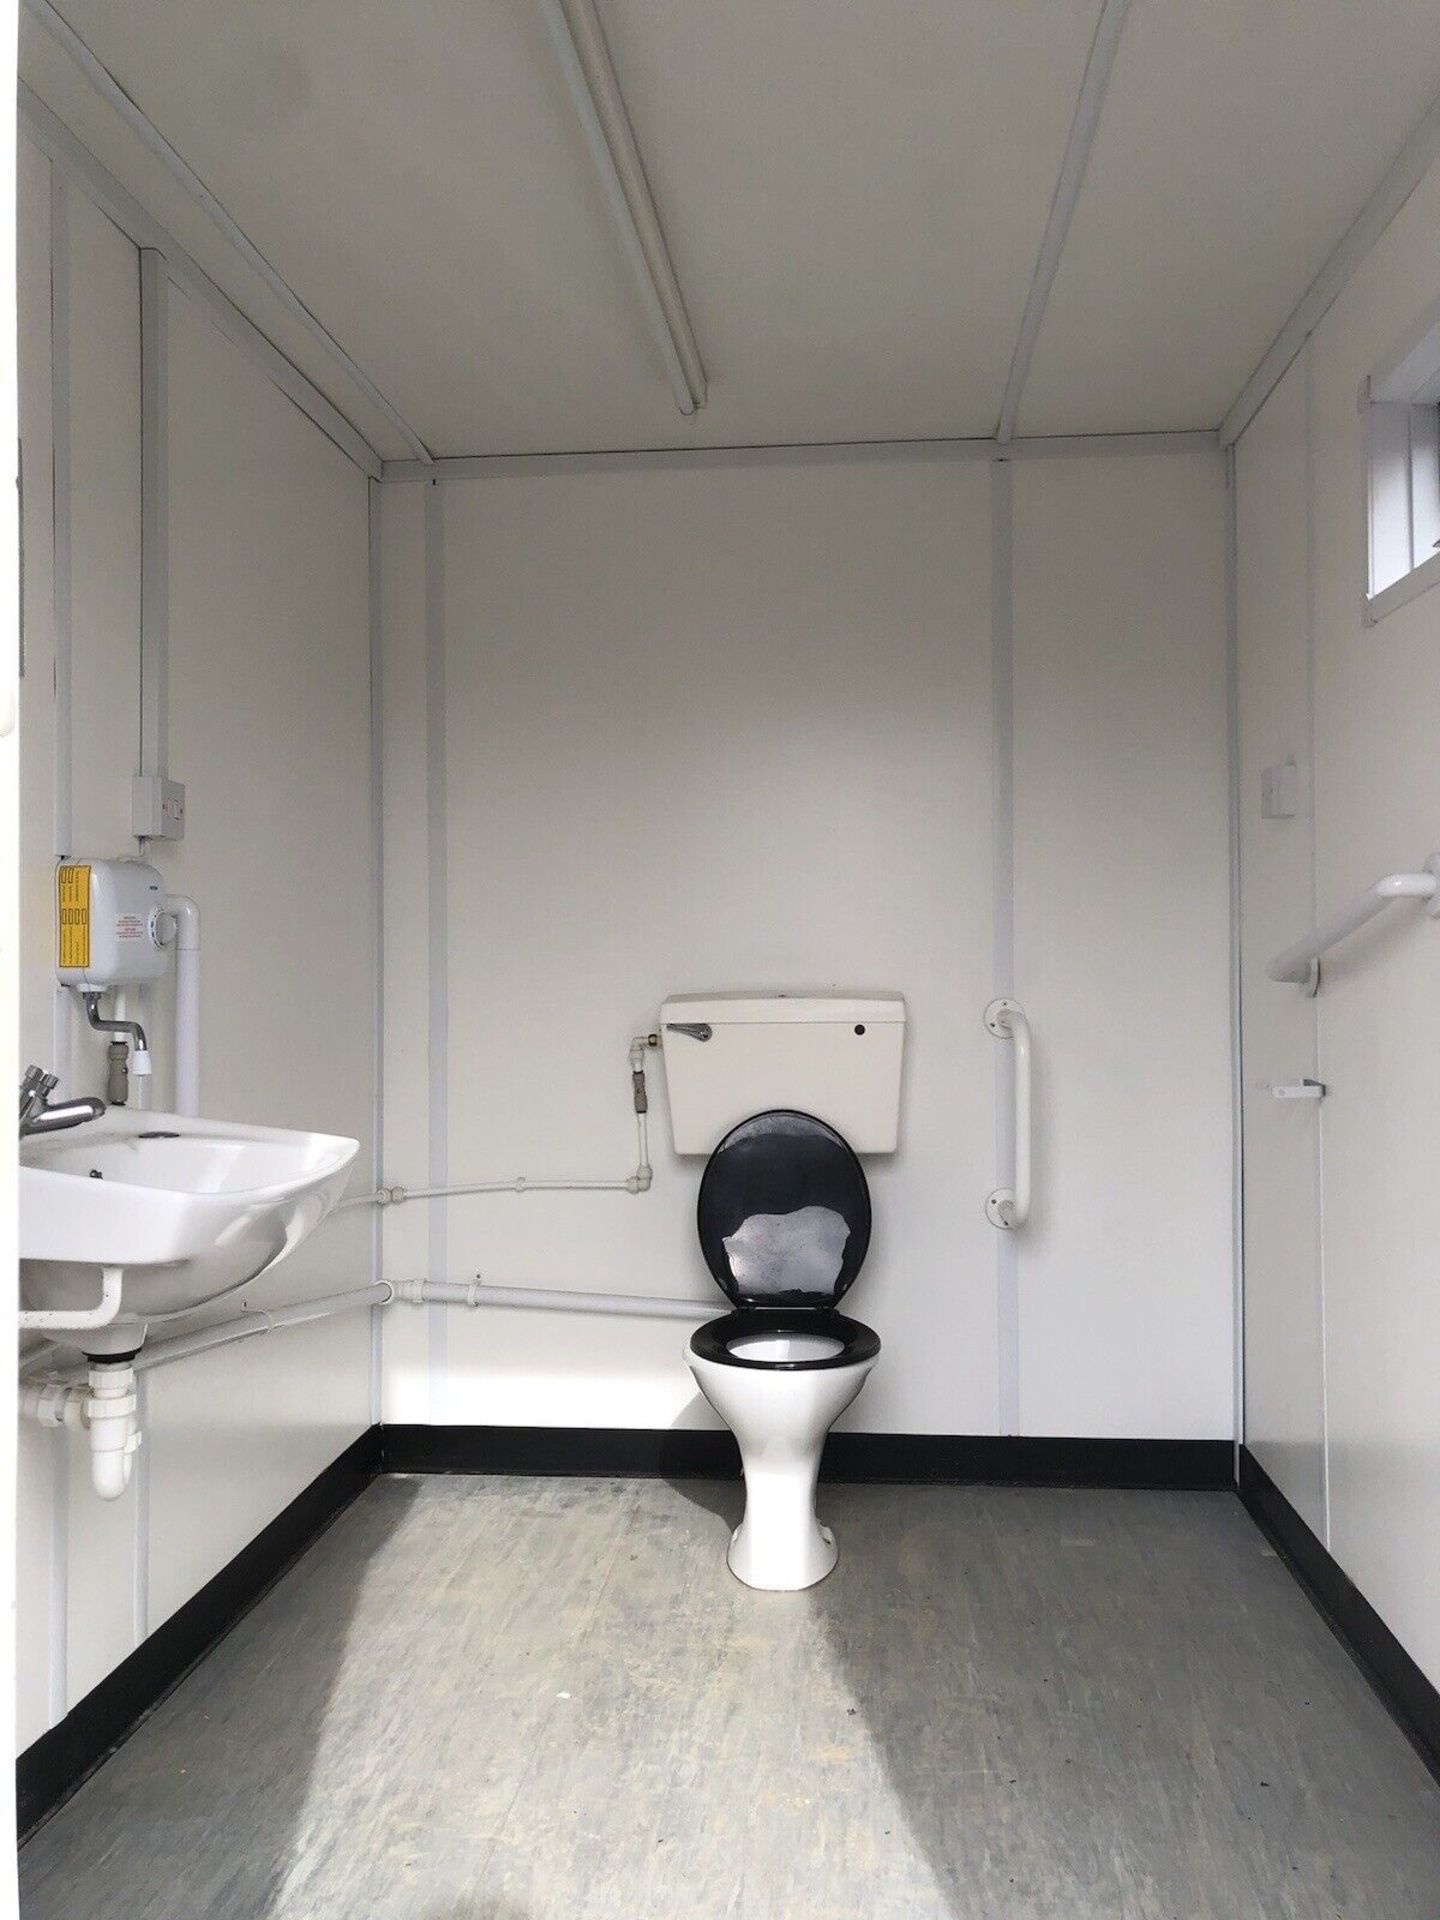 Portable Toilet Block With Shower Disabled Wheelchair Access - Image 10 of 10